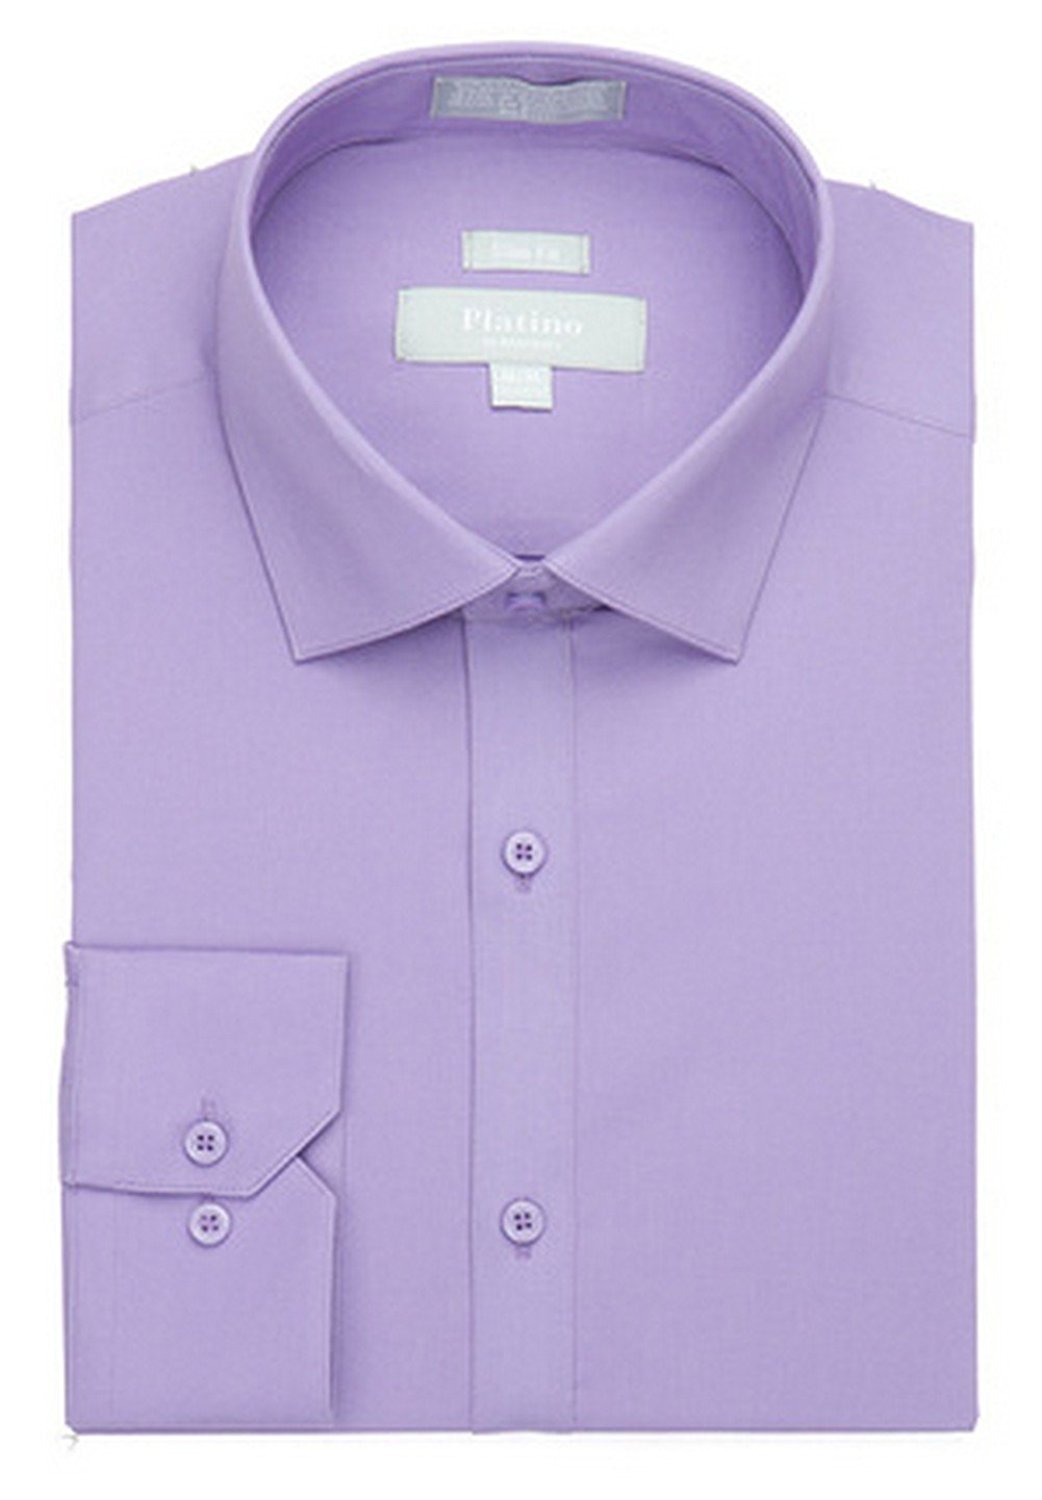 Marquis Platino Men's Slim Fit Cotton Stretch Long Sleeve Dress Shirt - CLEARANCE - FINAL SALE